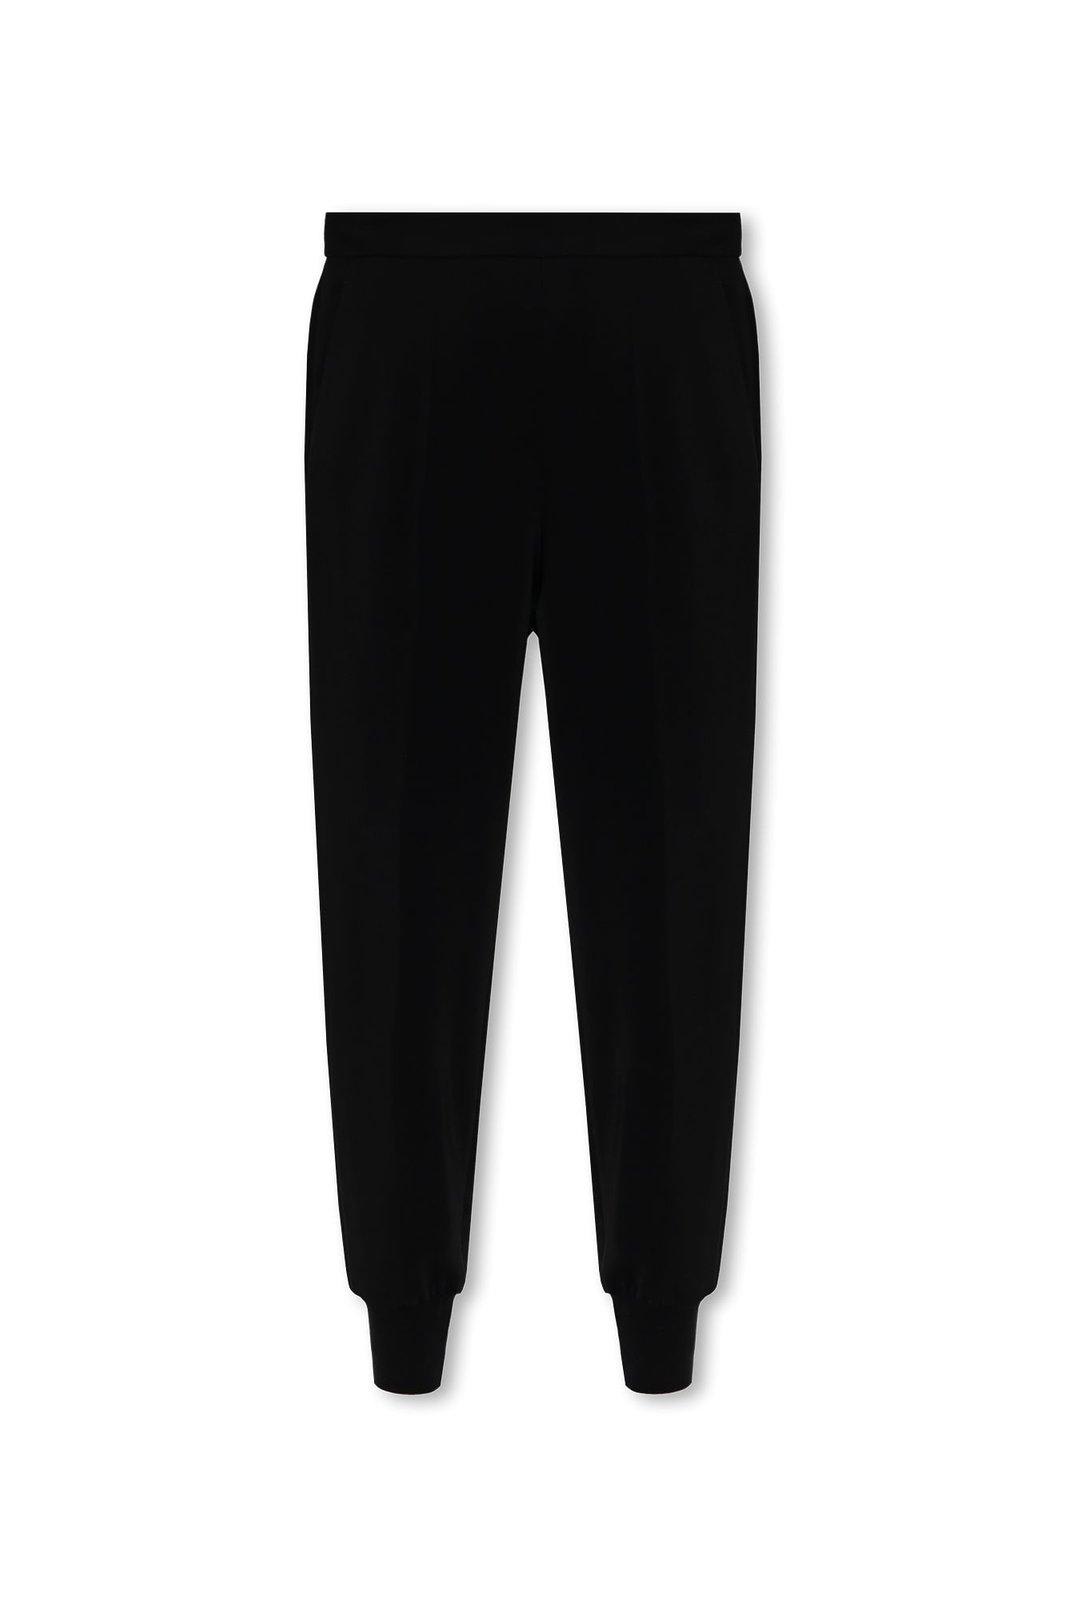 Pleated Front Trousers